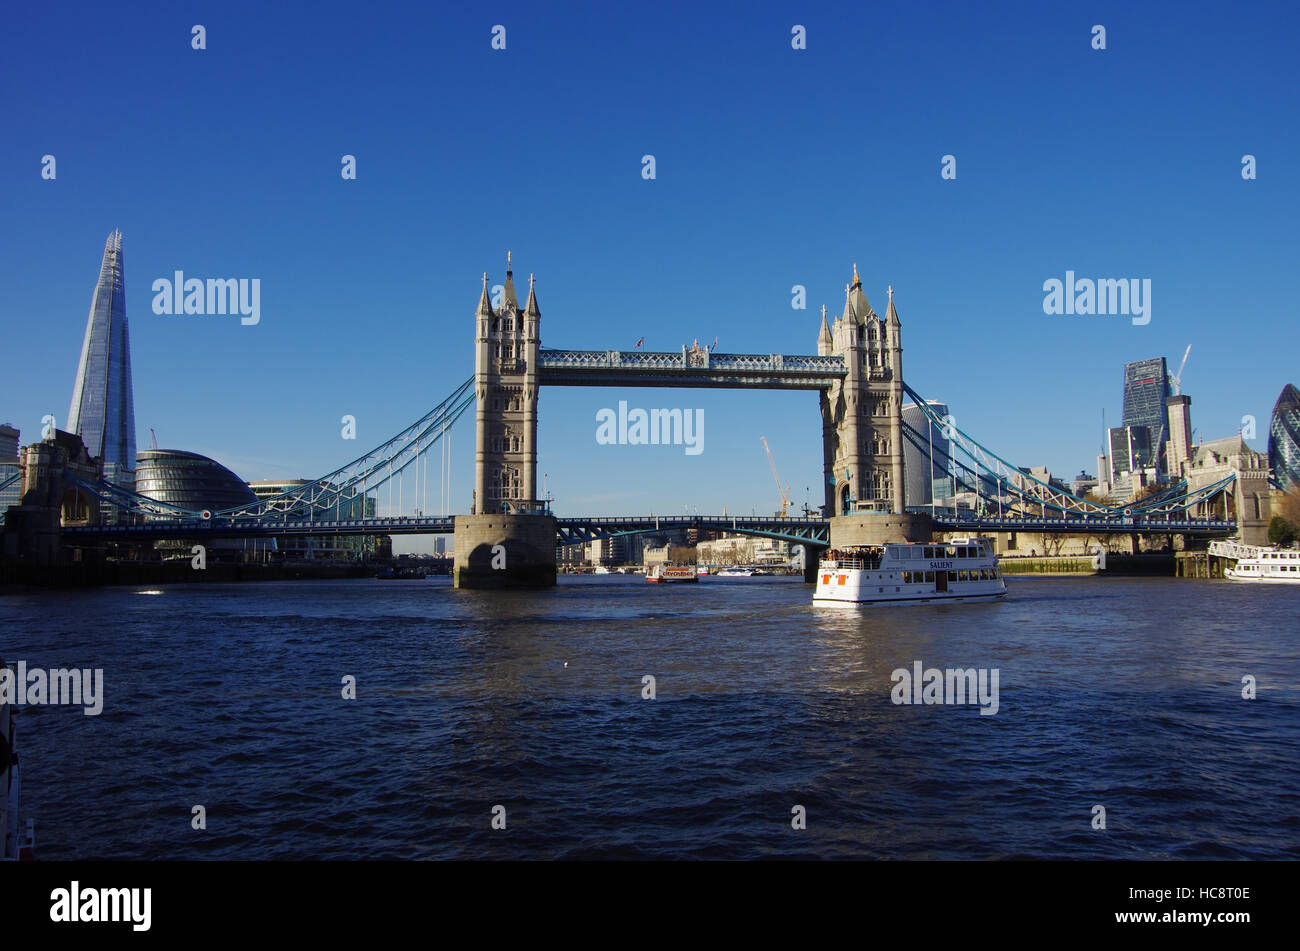 LONDON,UK - 01 DEC 2016 - Tower Bridge seen from a boat on the Thames Stock Photo